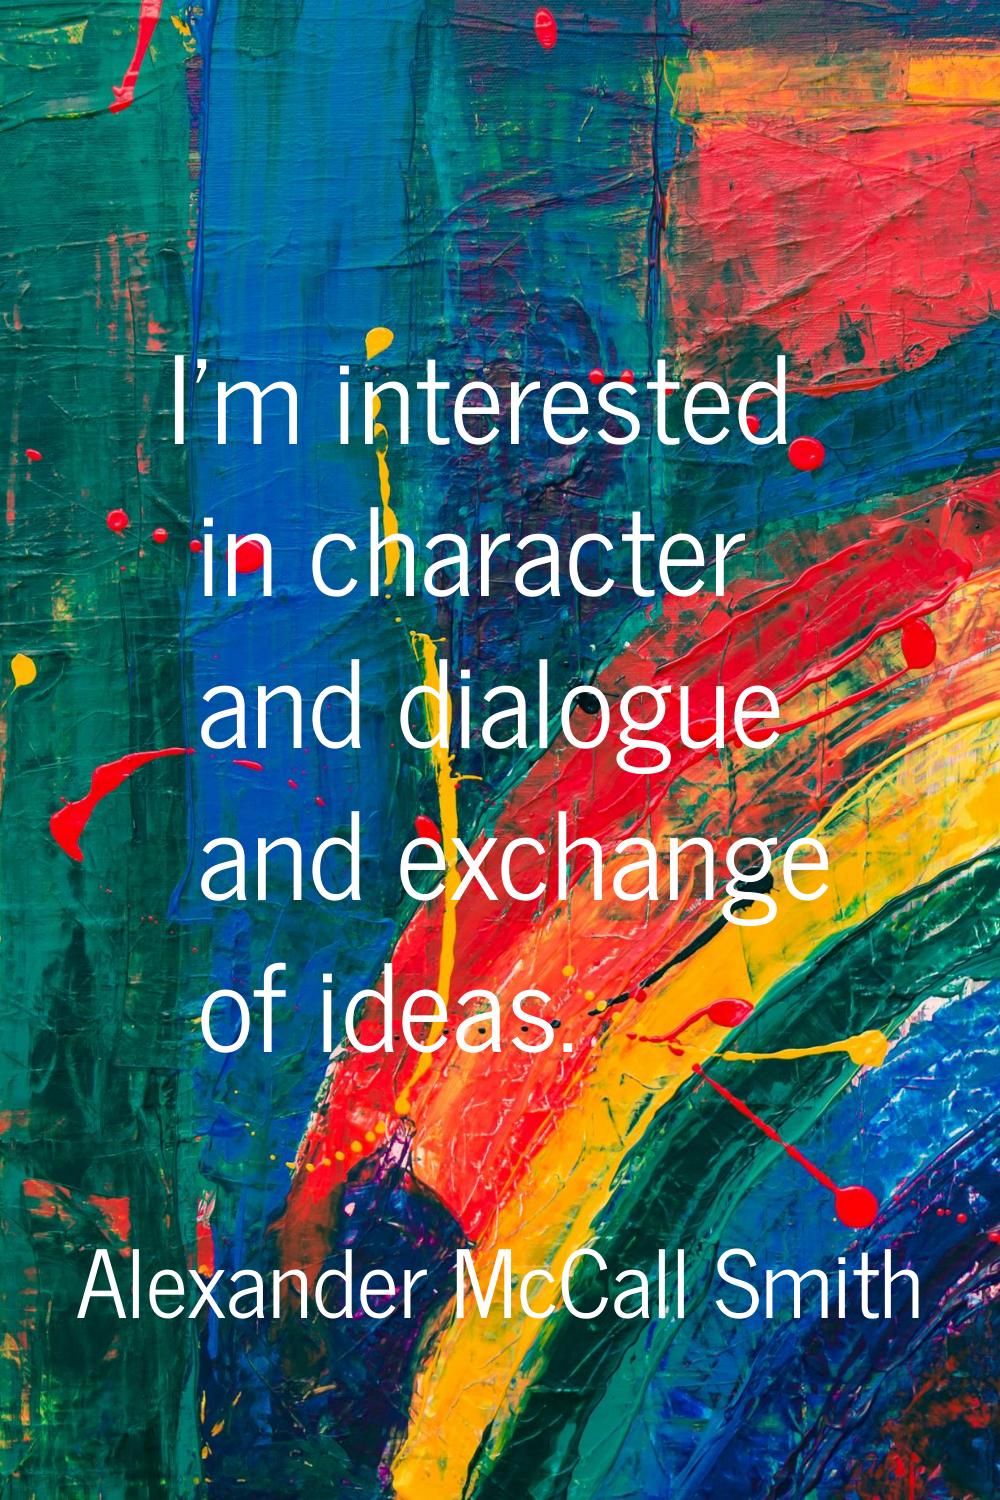 I'm interested in character and dialogue and exchange of ideas.